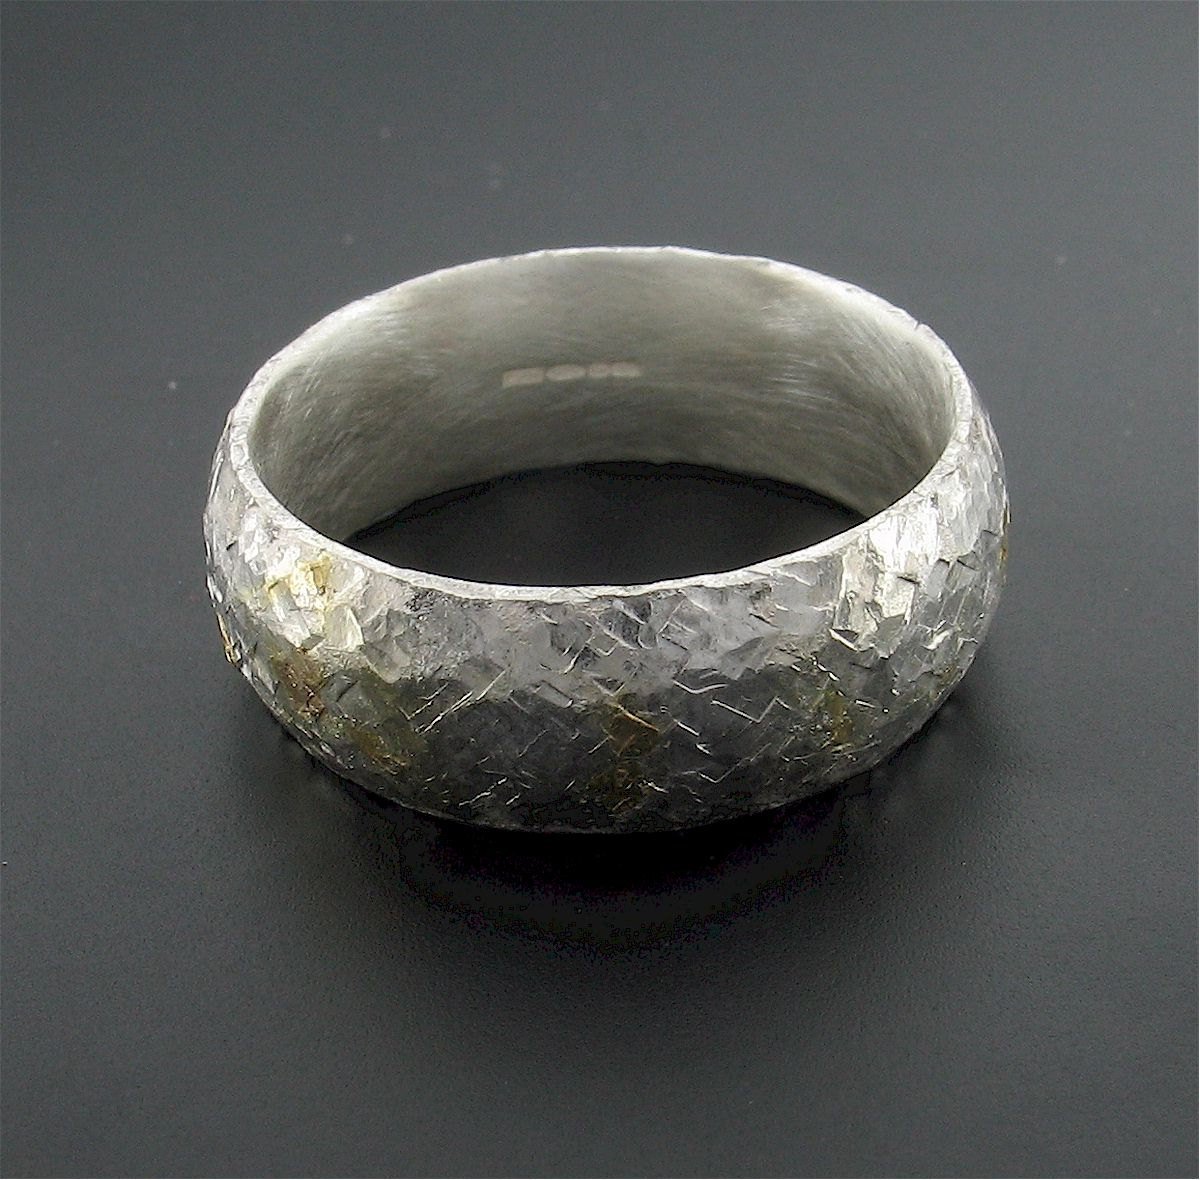 Silver and gold Morning View 8mm court wedding ring with rustic hammered surface. Original design handmade band for a man - Cumbrian Designs